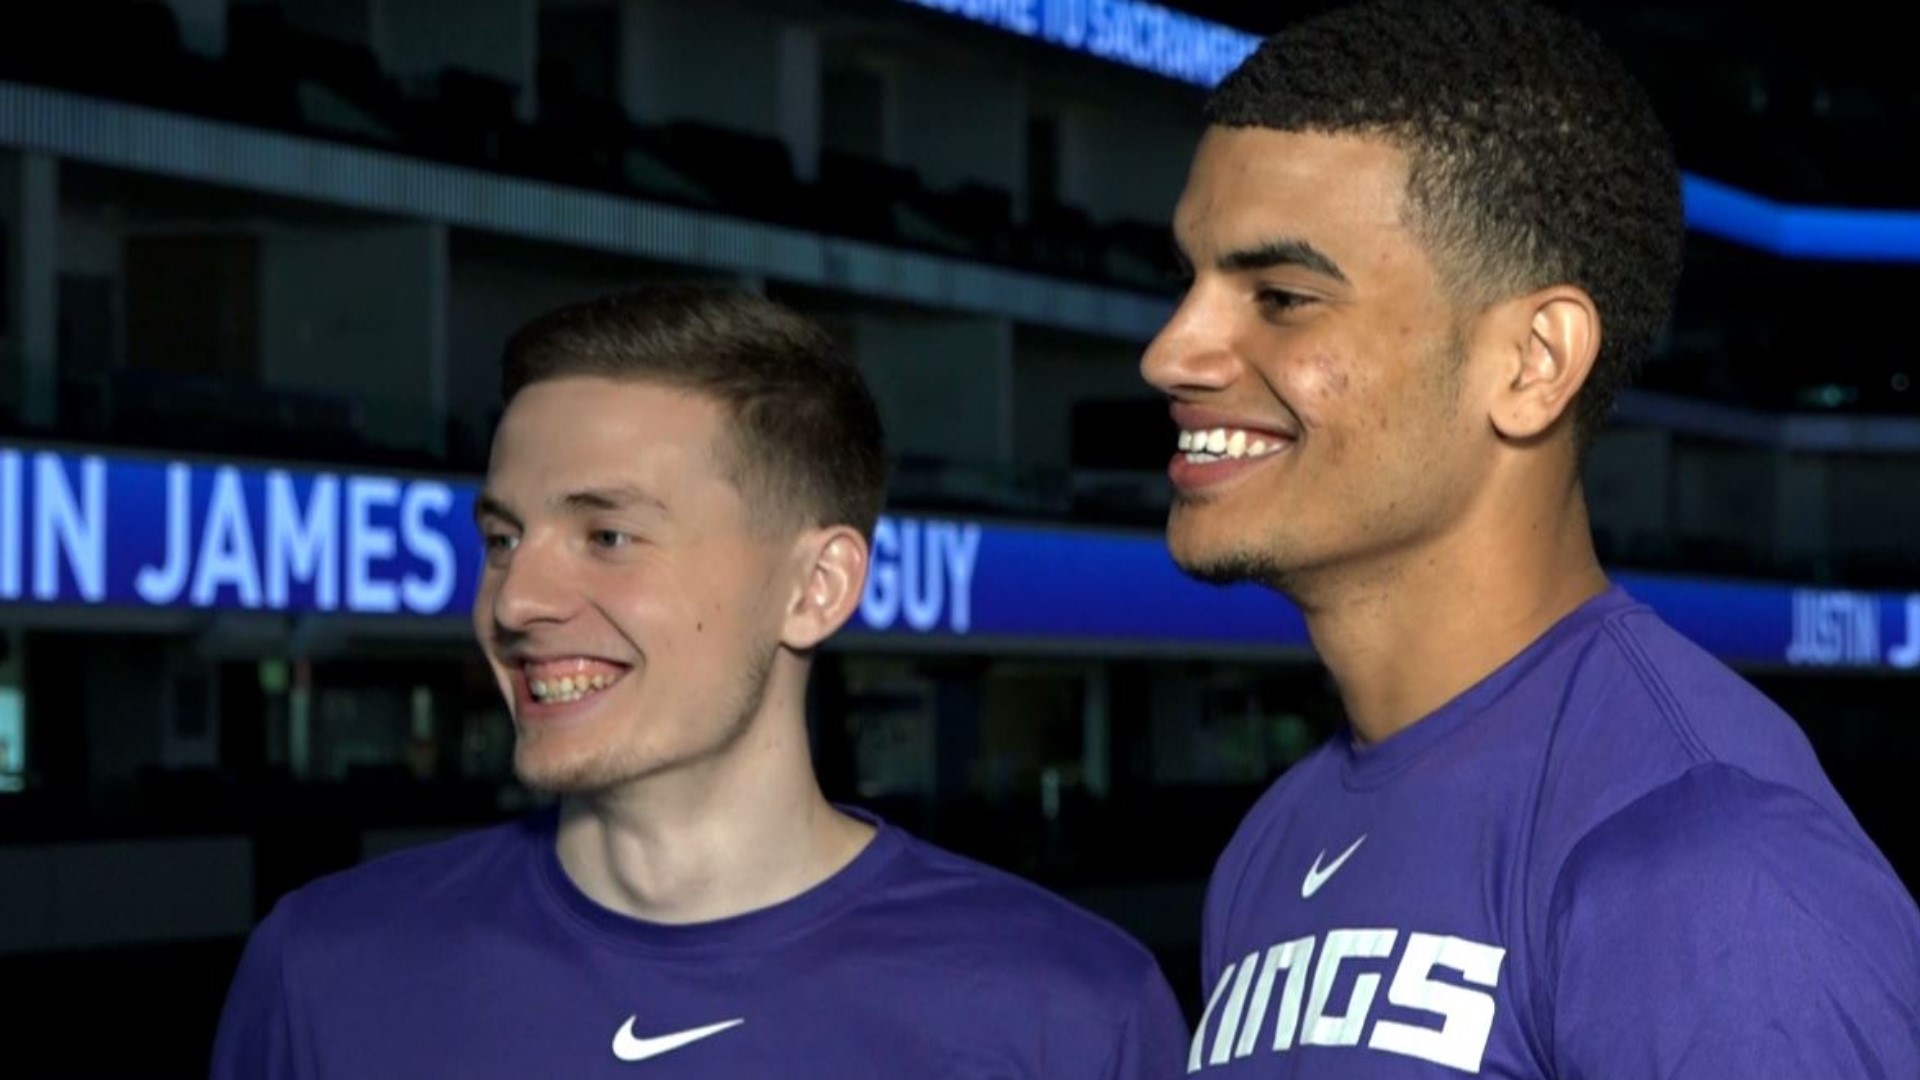 Sacramento Kings top draft picks Justin James of Wyoming and Virginia's Kyle Guy talk about their draft day experience, joining their new NBA home, and what they'll contribute to the team.